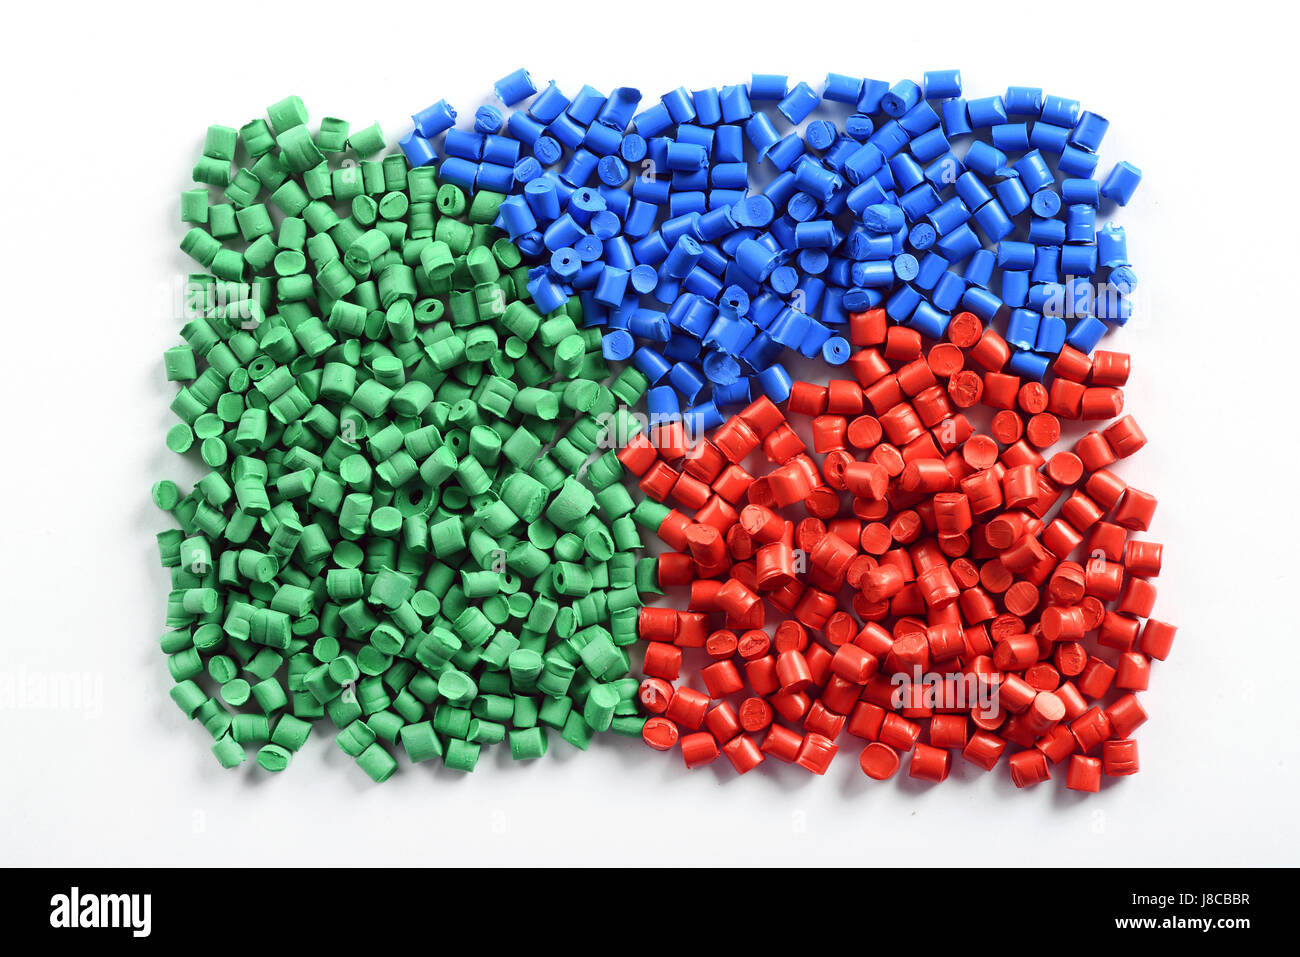 Colorful collection of molded plastic pellets or granules made from recycled waste to be reused in the industry as a raw material to manufacture produ Stock Photo